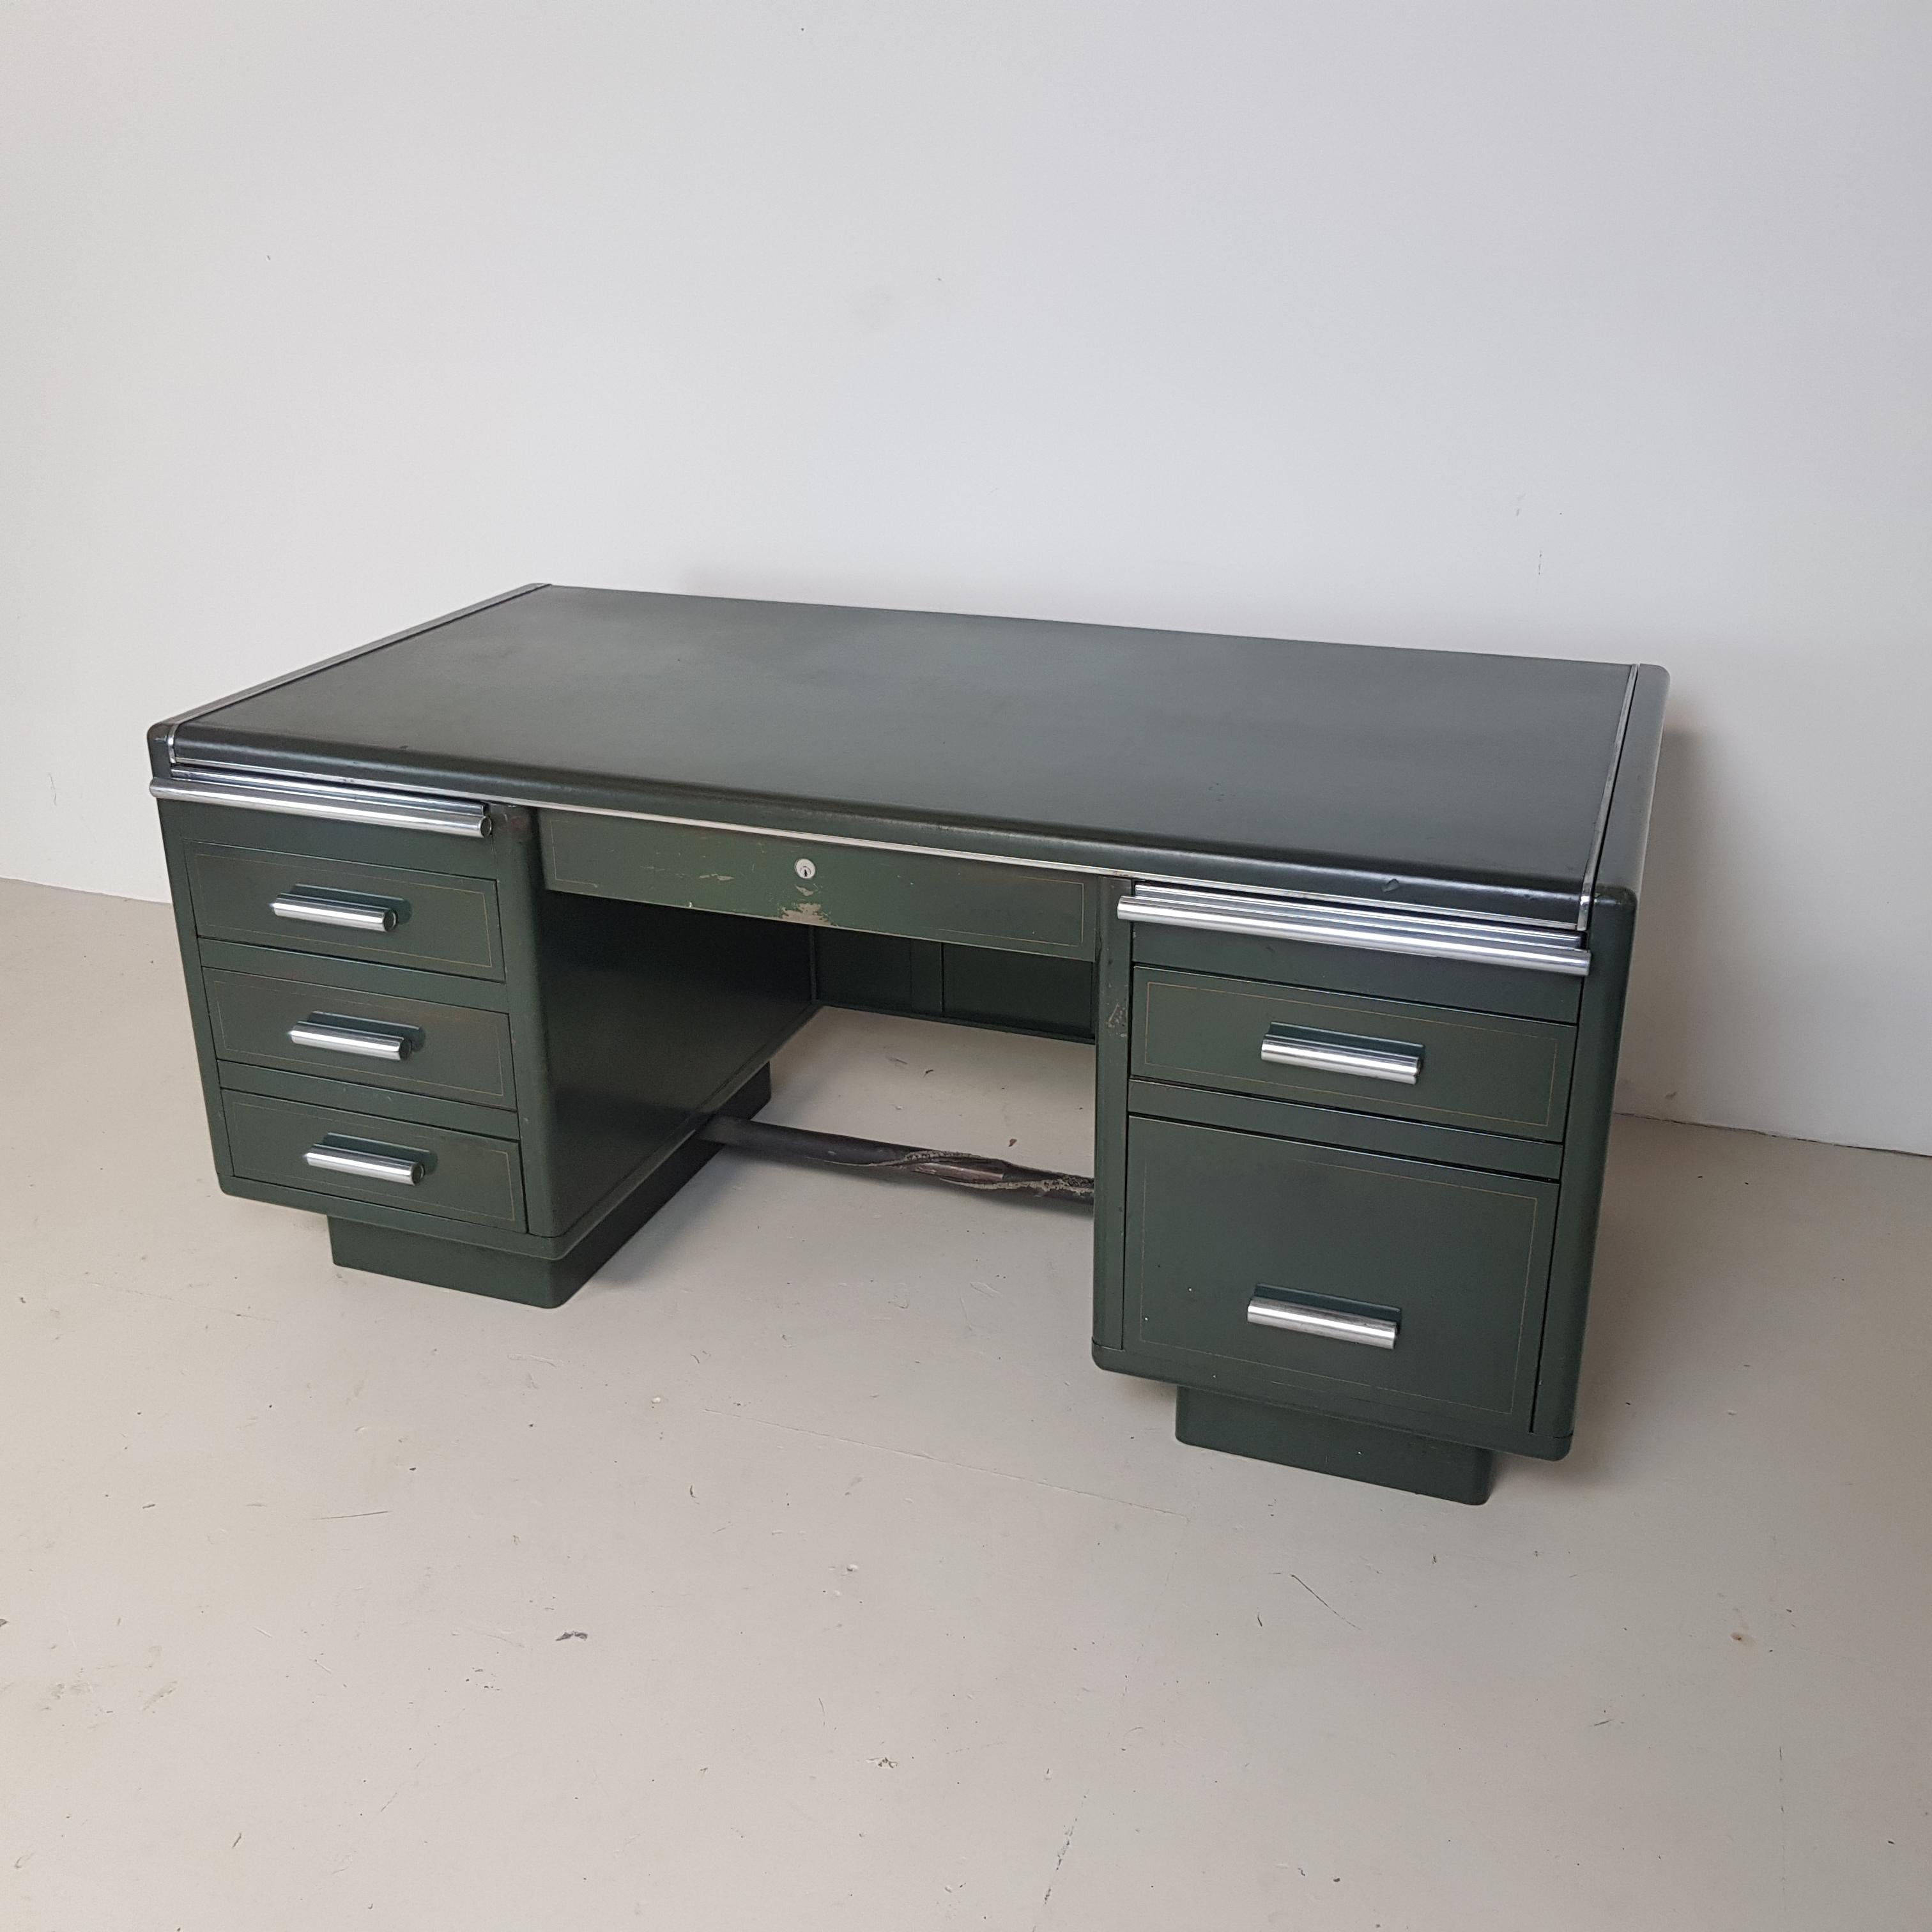 Lovely vintage double pedestal partners steel desk. This desk can be used from both sides. Drawers on one side and cupboards on the other. In its original dark green paintwork.

In good vintage condition - this piece comes from a working